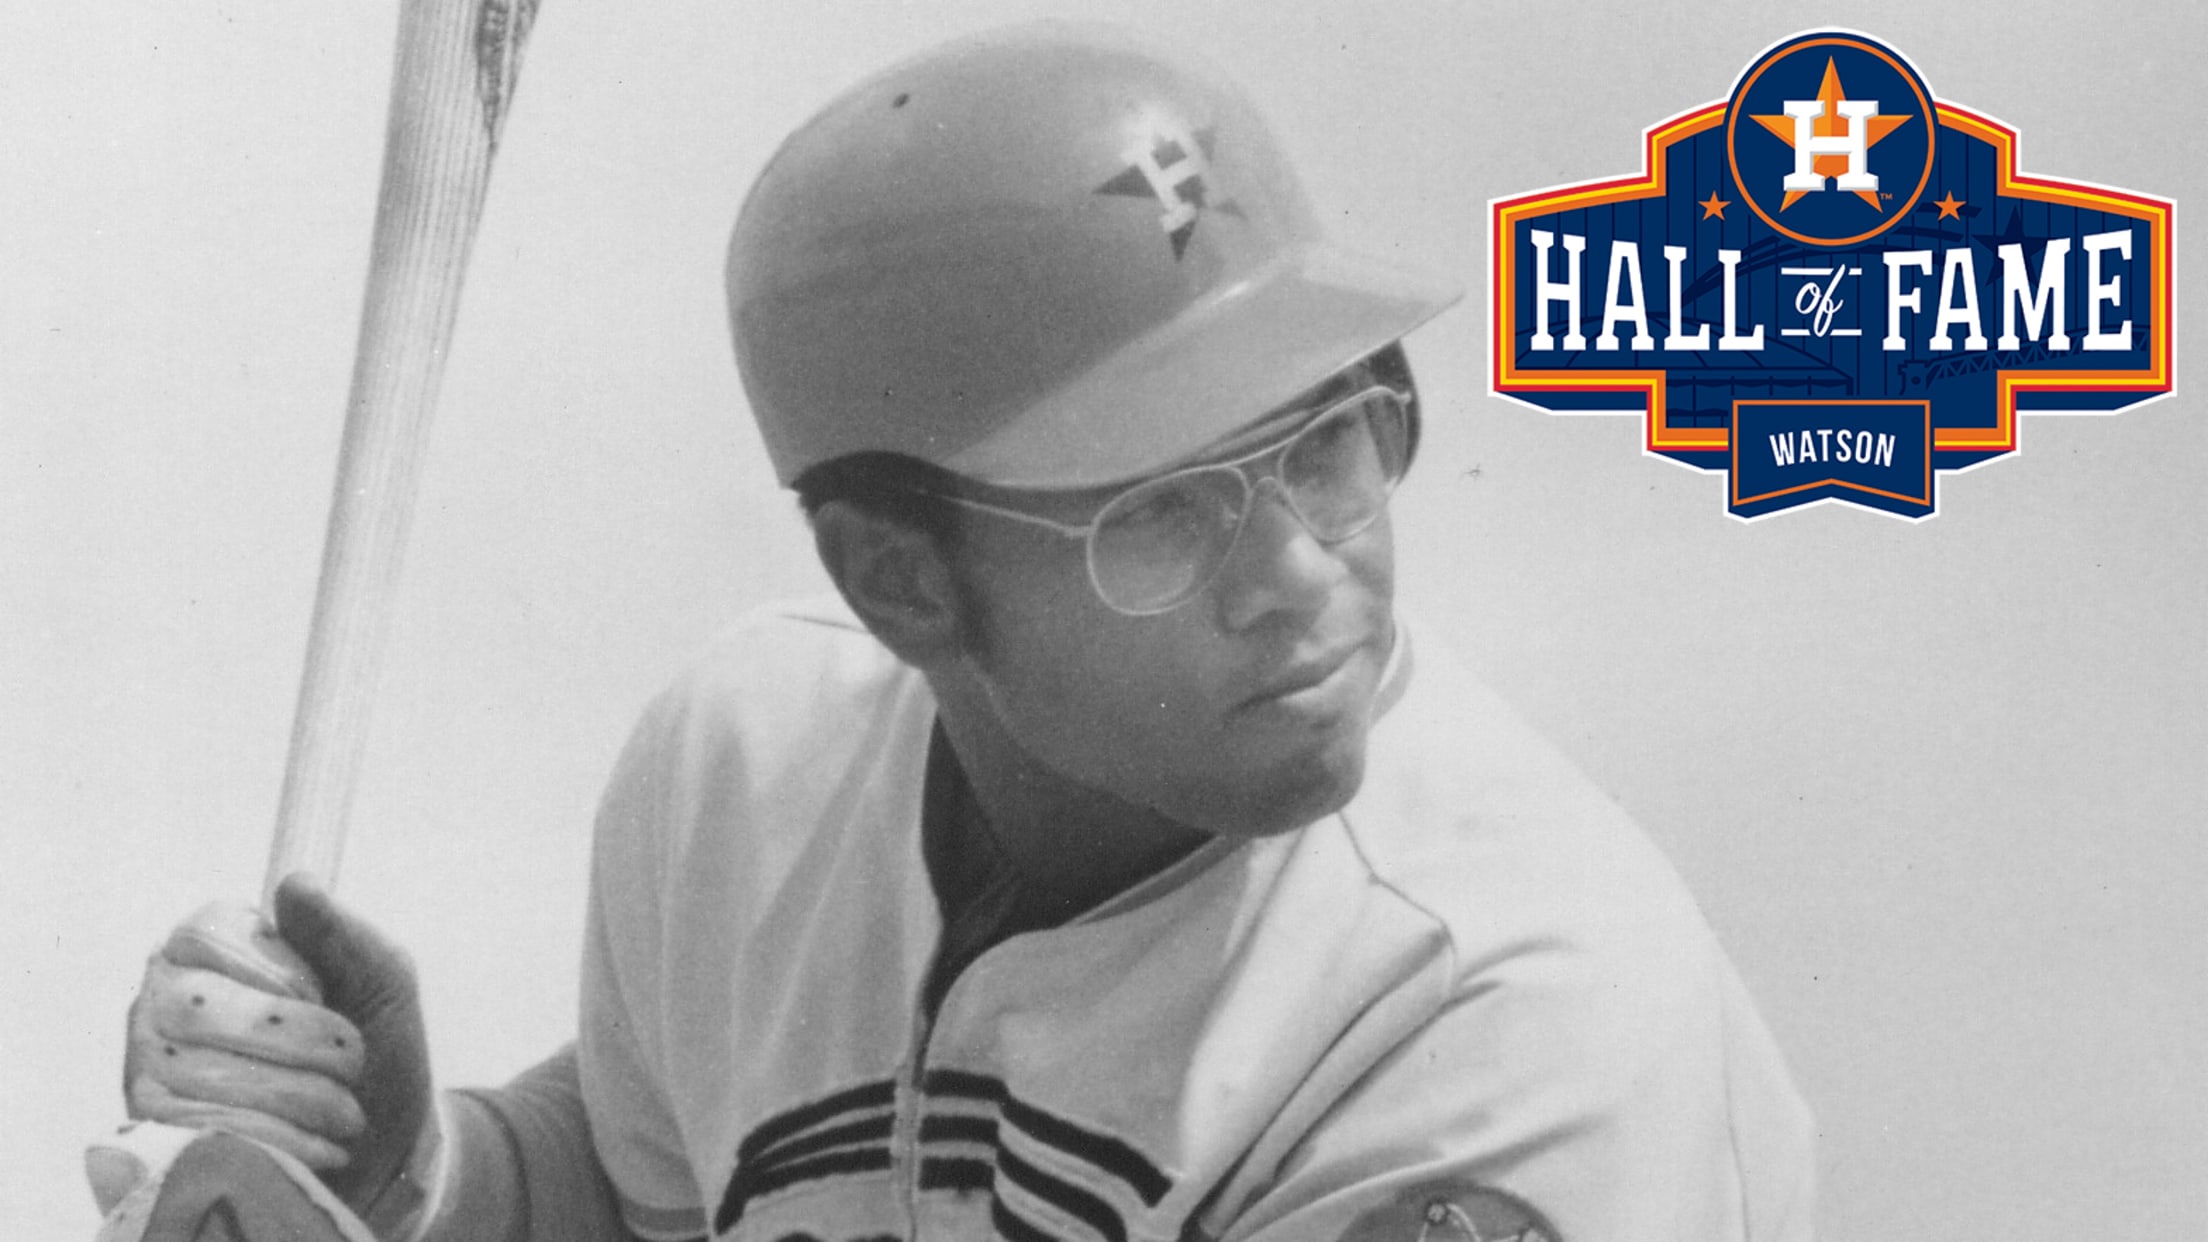 UHV's Puhl selected to Houston Astros Hall of Fame